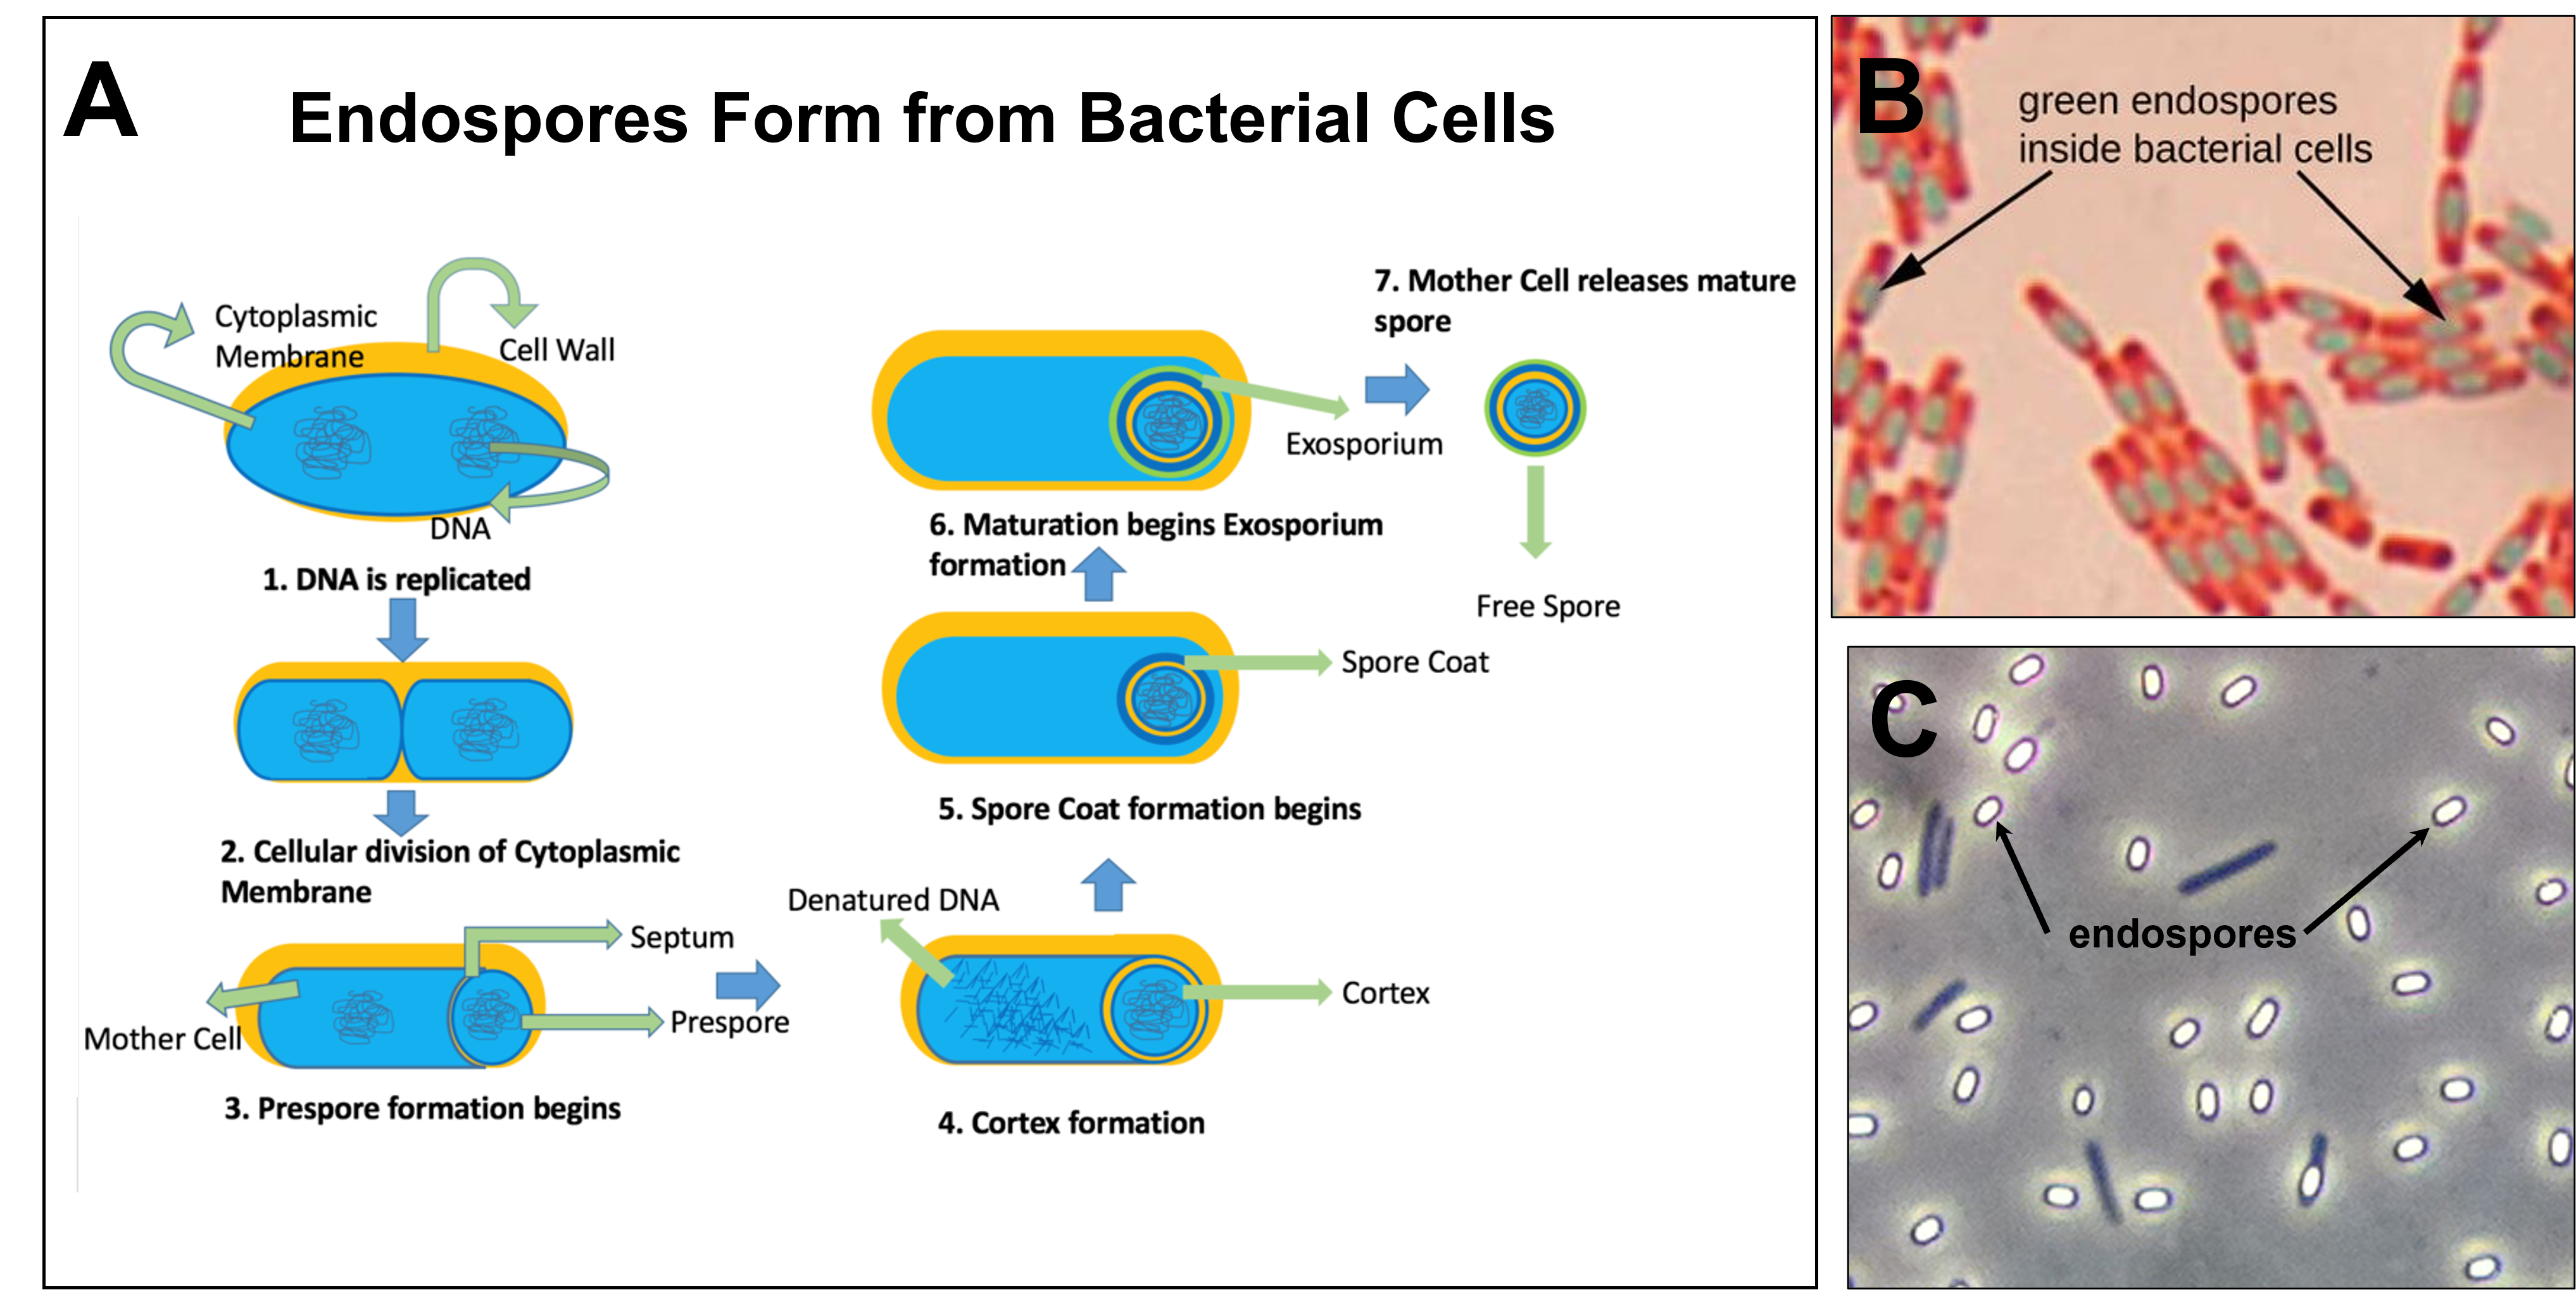 endospore formation process and how endospores look in the microscope